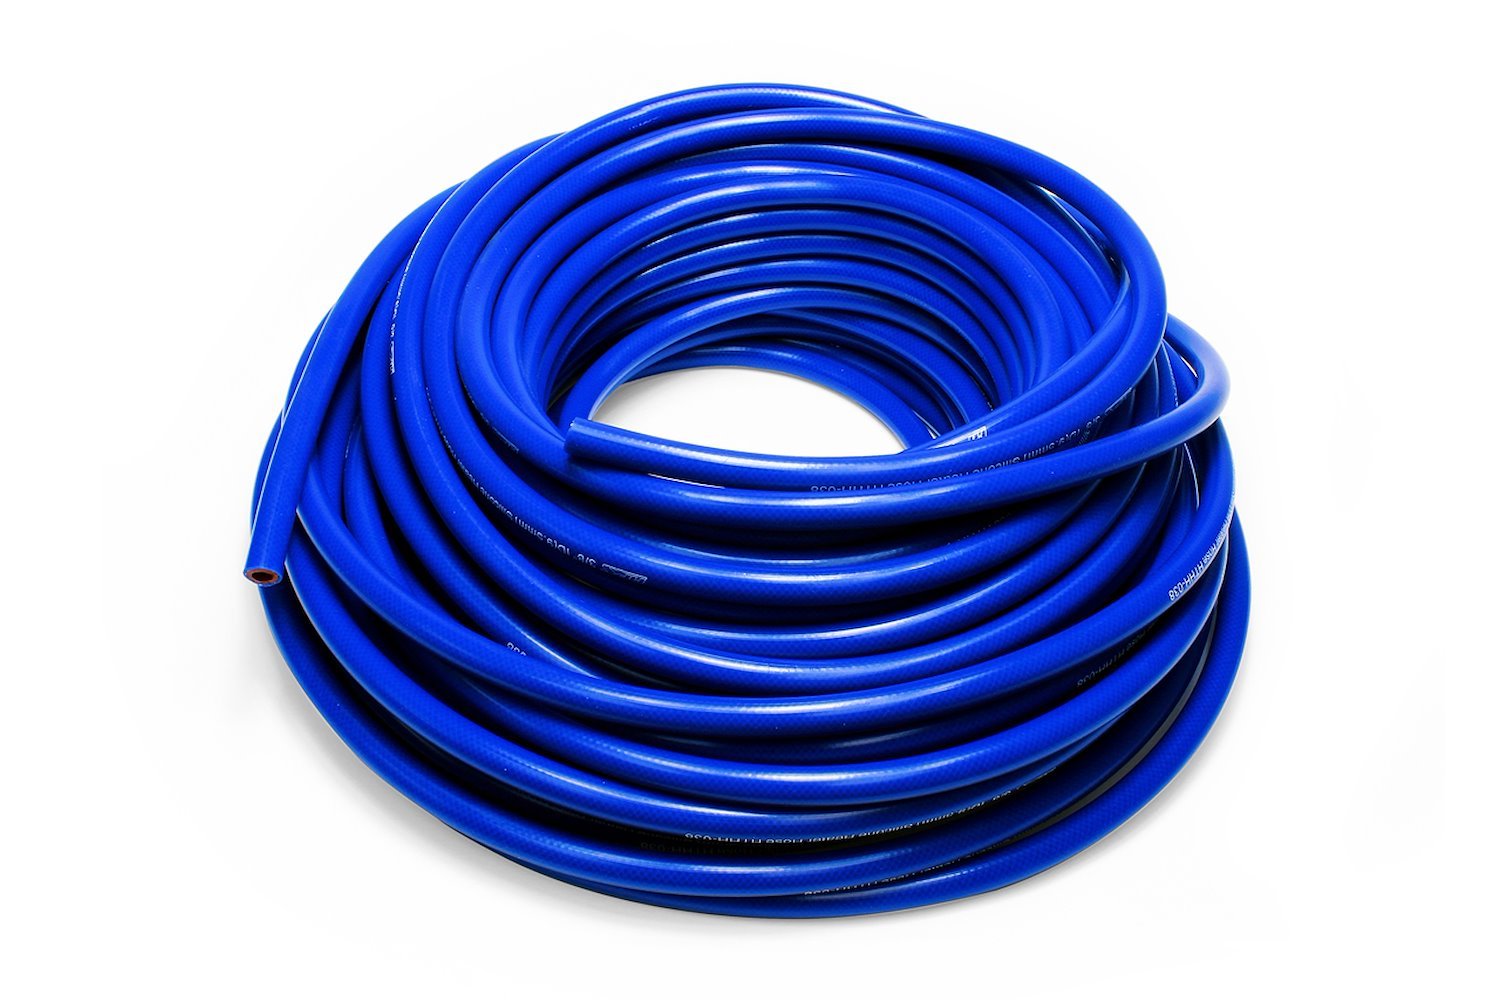 HTHH-013-BLUEx25 Silicone Heater Hose Tubing, High-Temp Reinforced, 1/8 in. ID, 25 ft. Roll, Blue